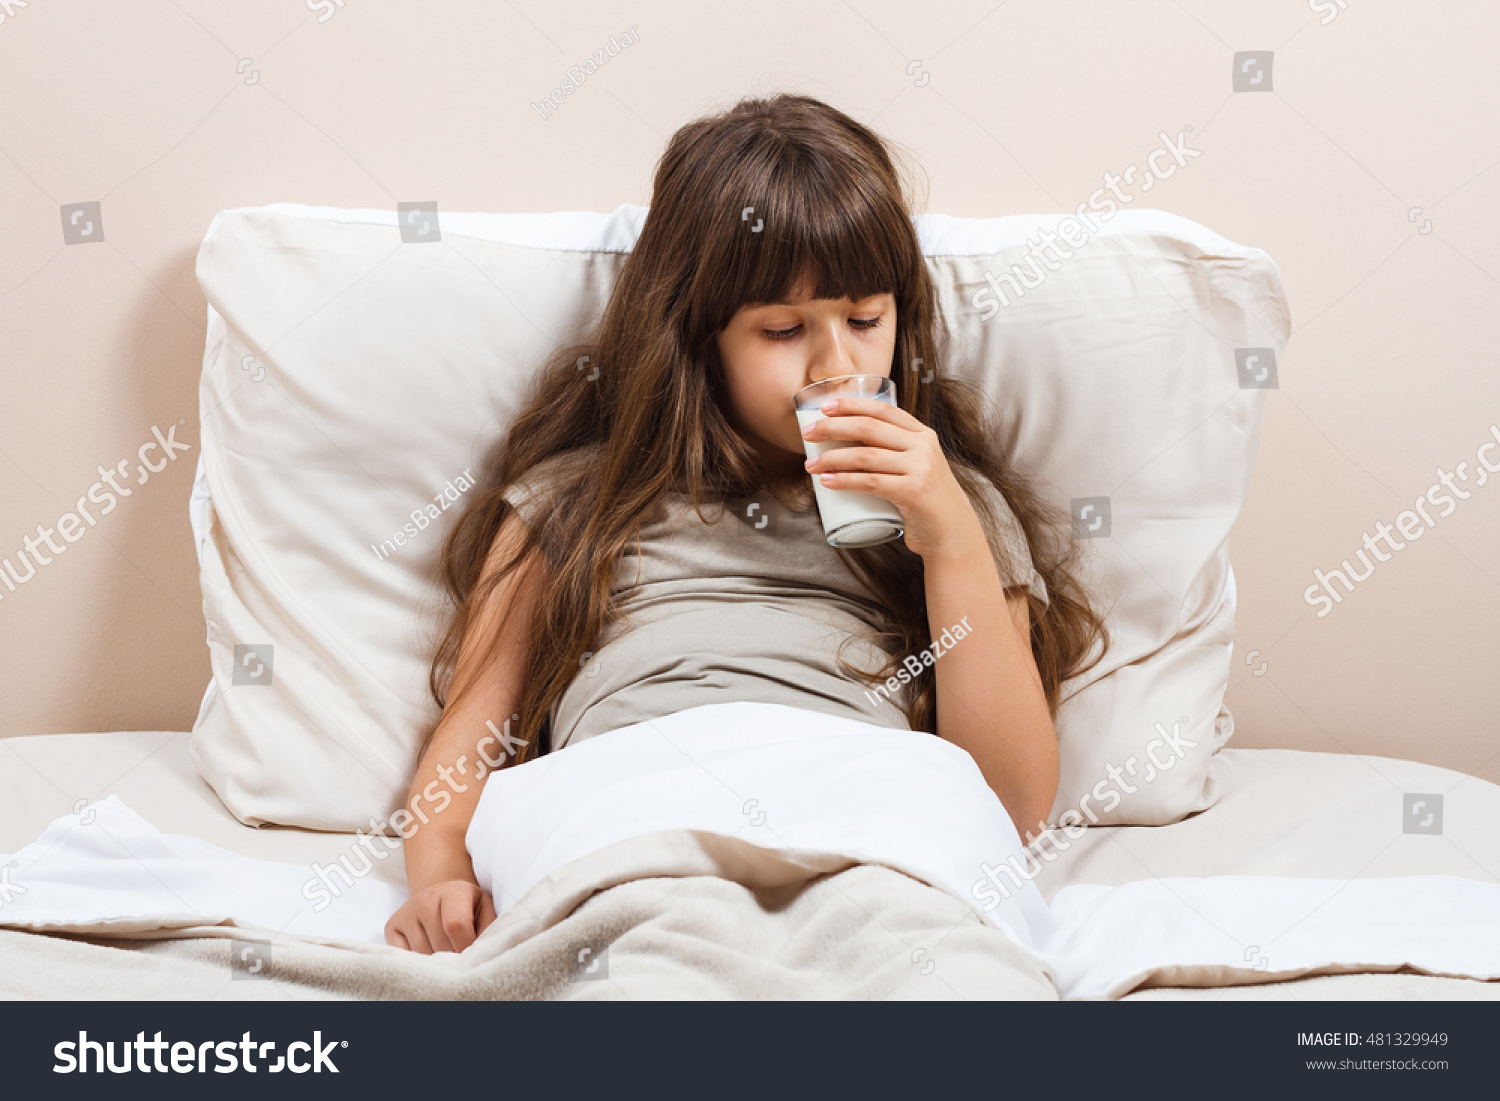 Cute little girl in pajamas is sitting on bed and drinking milk.Little girl drinking milk
 #481329949